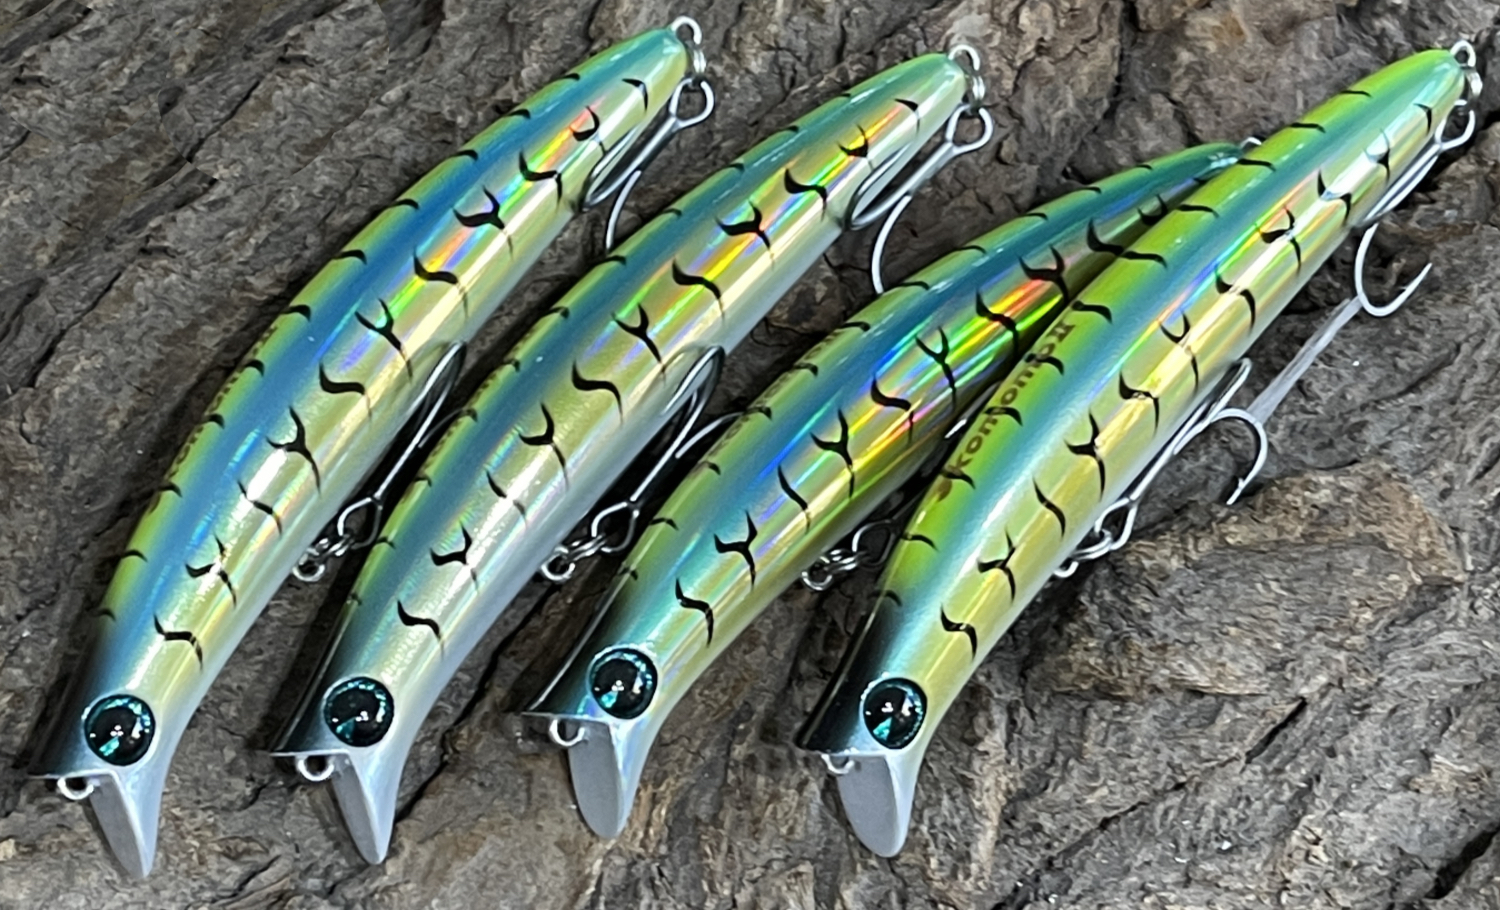 Sexy mackerel lures - To tempt bass and anglers! - North Devon